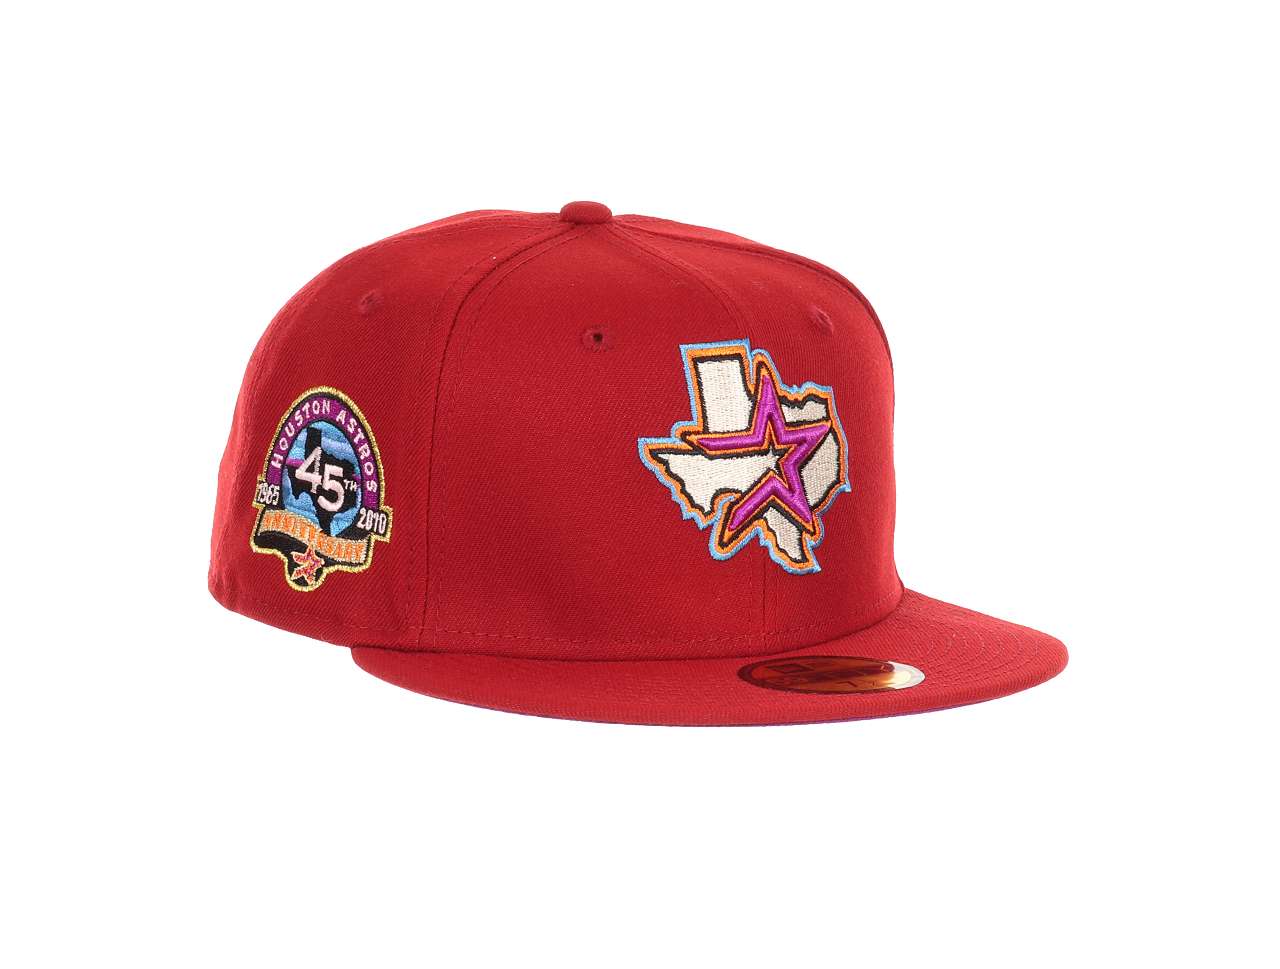 Houston Astros MLB 45th Anniversary Sidepatch St. Arnold Root Beer Red 59Fifty Basecap New Era